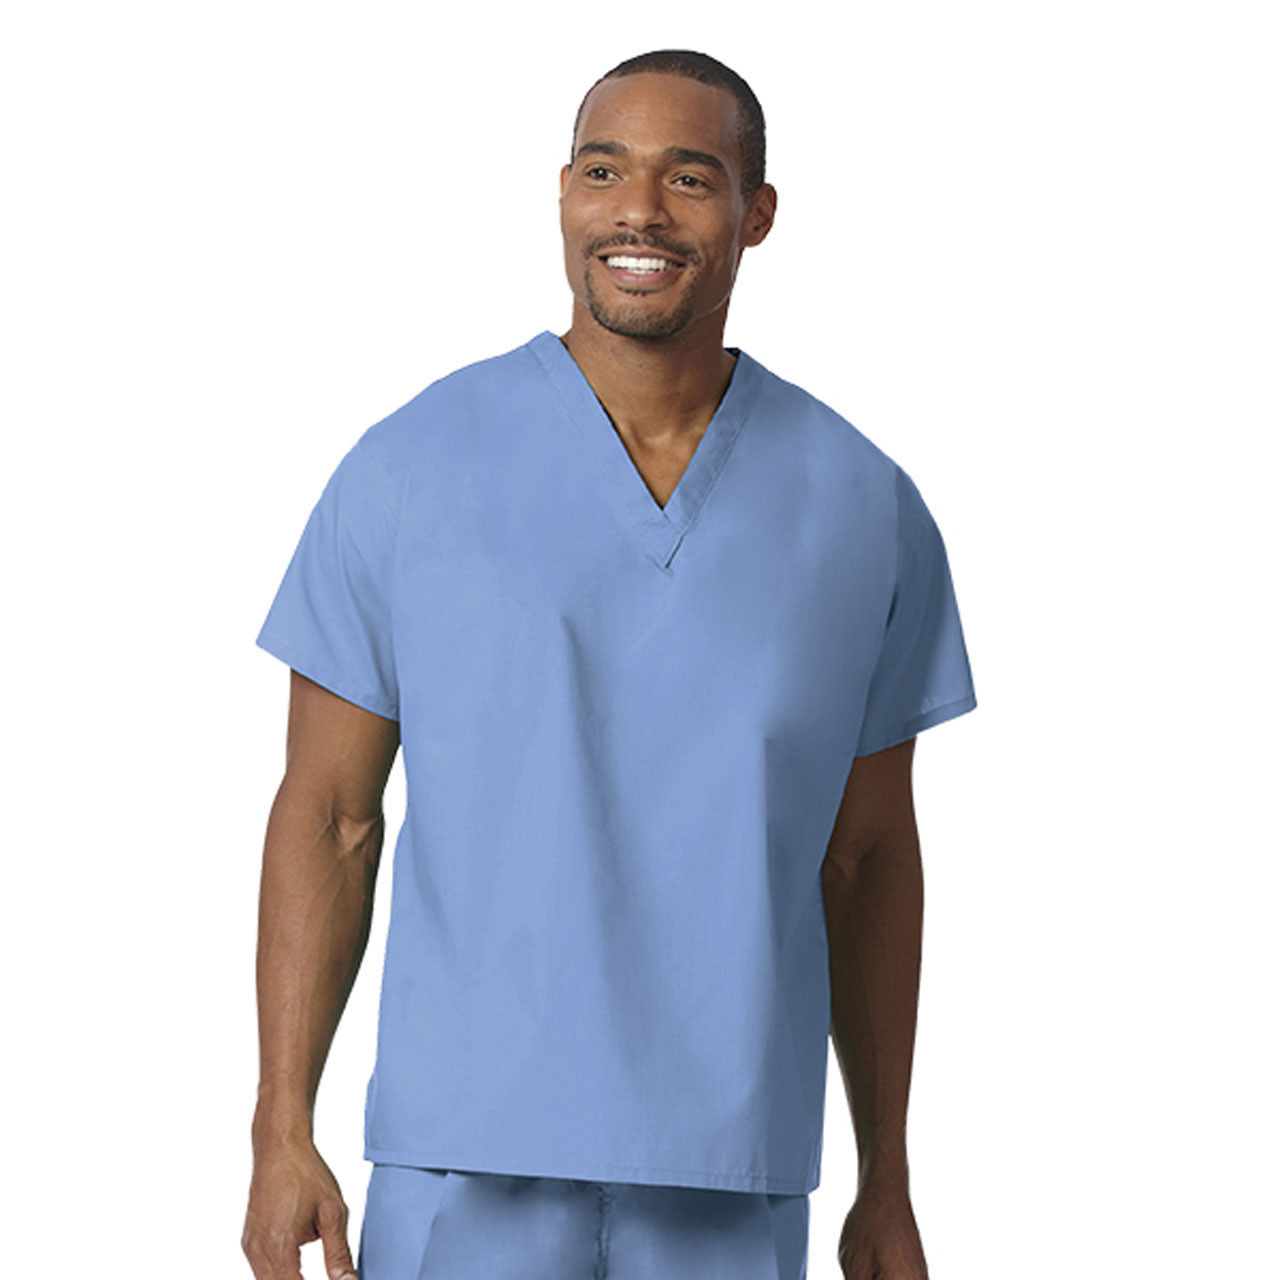 In what settings can these blue surgical scrubs be utilized?